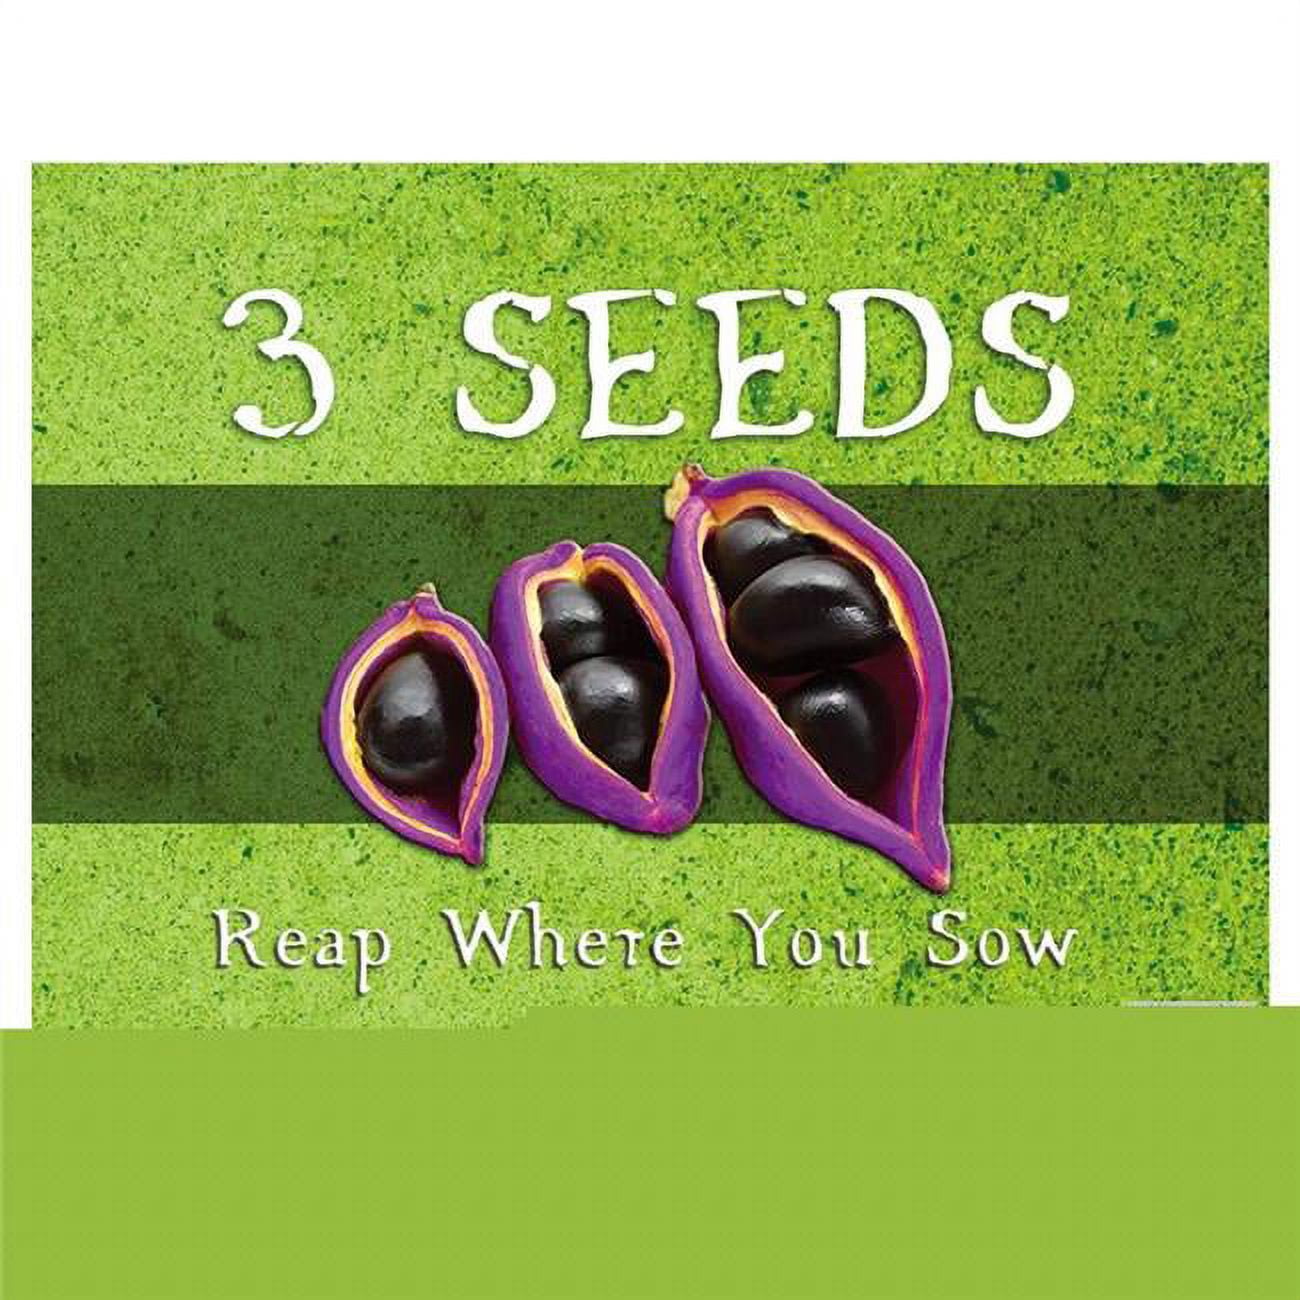 Picture of Chara Games XRG0002 3 Seeds - Reap Where You Sow Game